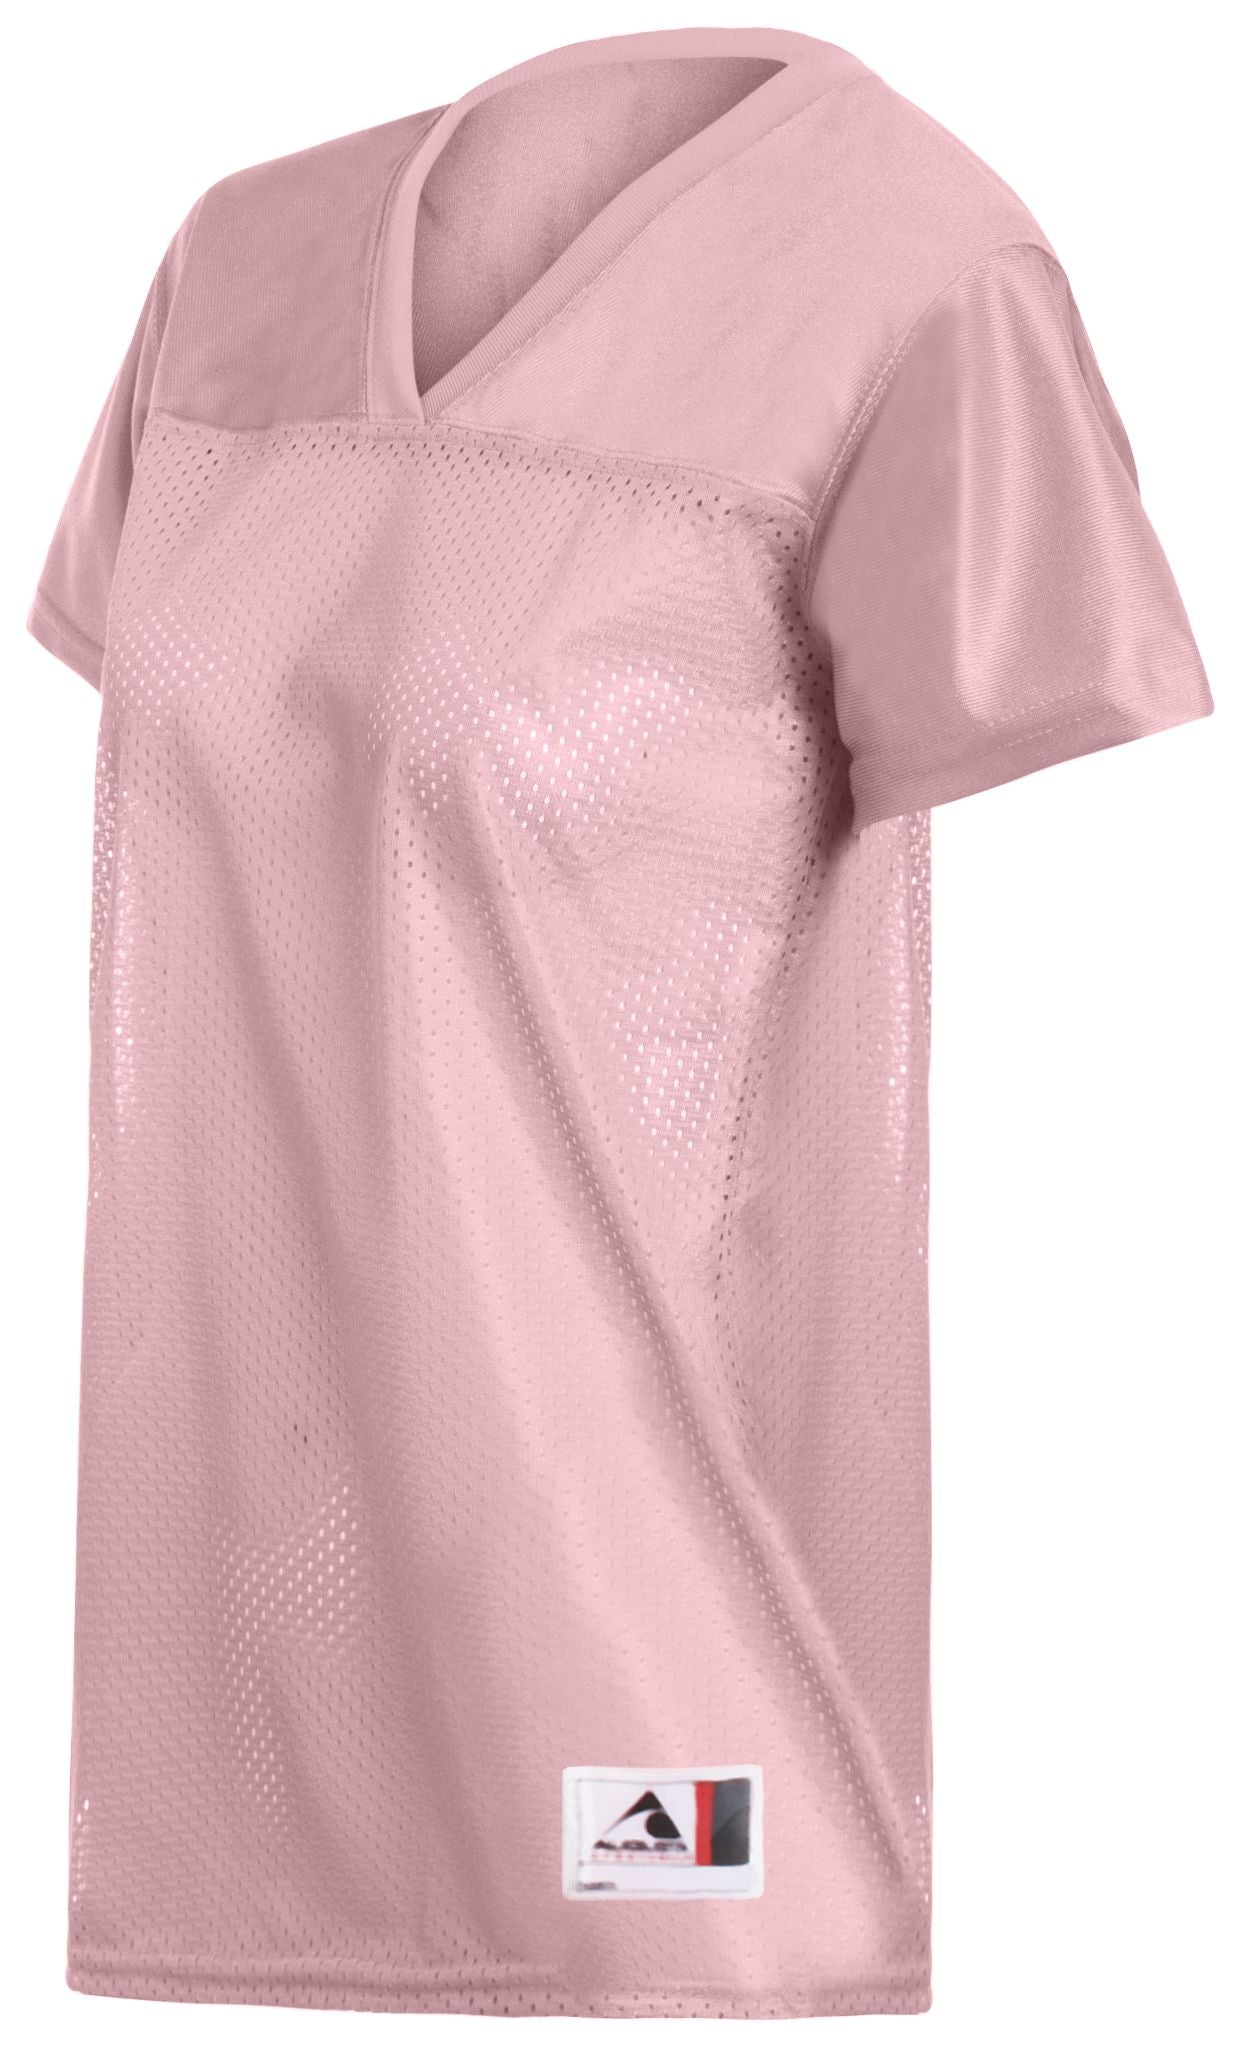 Augusta Sportswear Ladies Replica Football Tee in Light Pink  -Part of the Ladies, Ladies-Jersey, Augusta-Products, Football, Shirts, All-Sports, All-Sports-1 product lines at KanaleyCreations.com